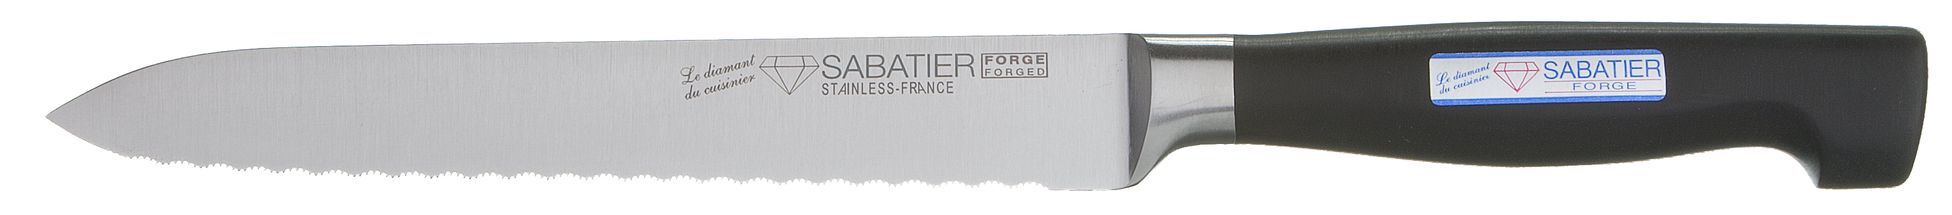 Diamant Sabatier Office Knife Forge Serrated 14 cm